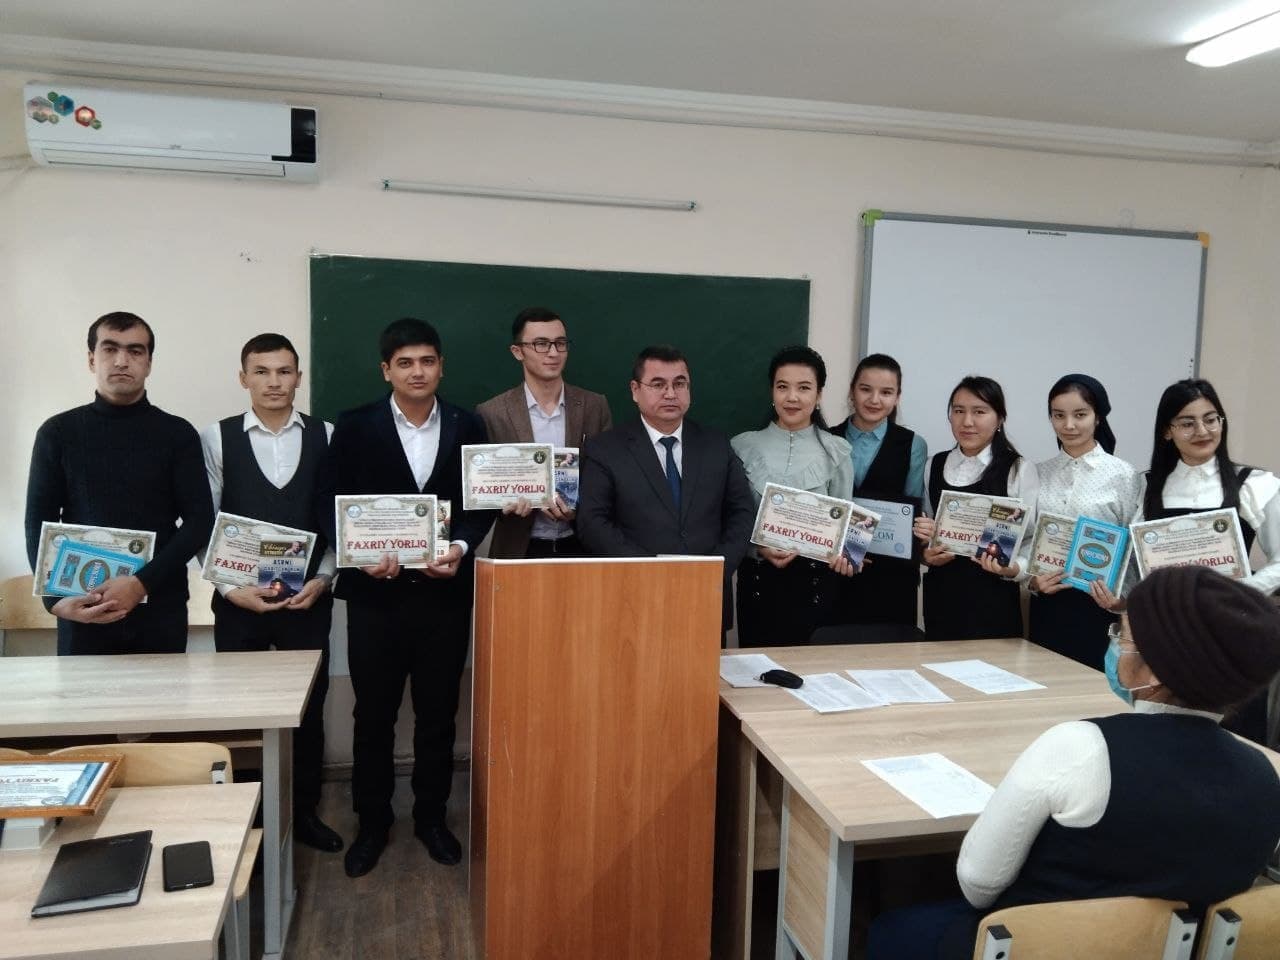 The Council of the Faculty of Philology was held